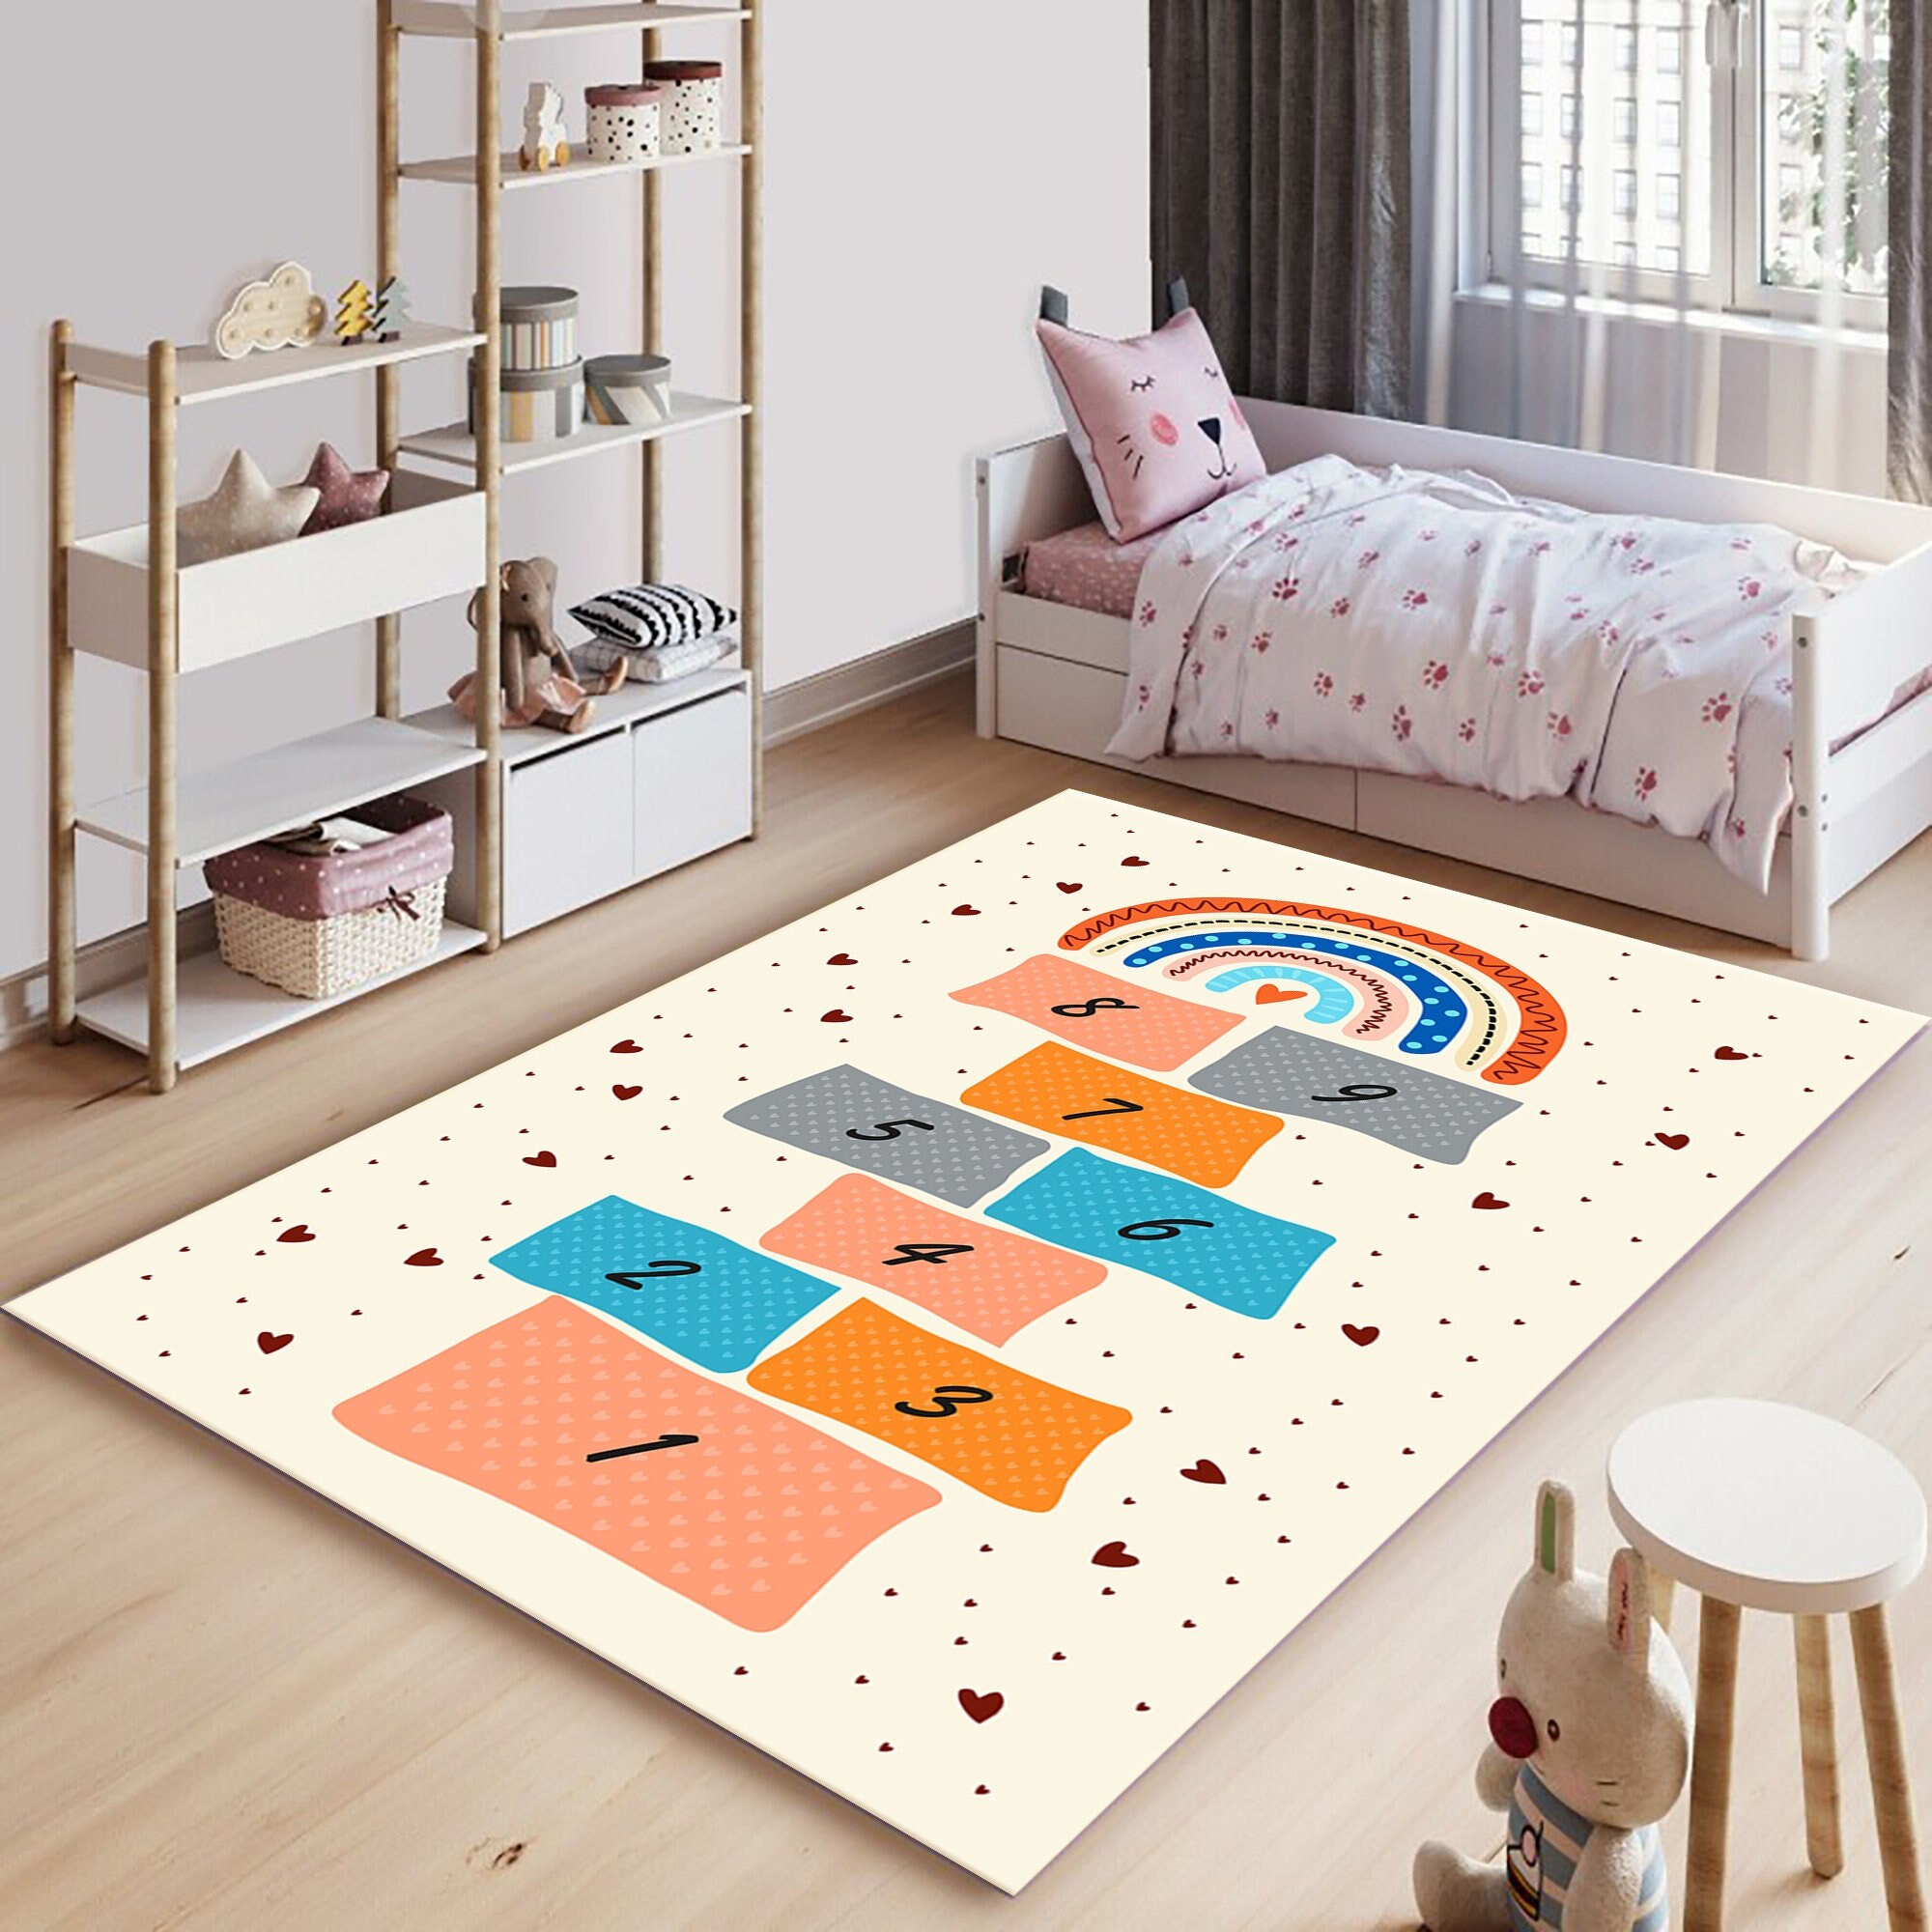 Gray Dytiying Hopscotch Game Rug Kids Hop and Count Carpet Crawling Jumping Play Runner Rug Play Mat Bedroom Sports Carpet 